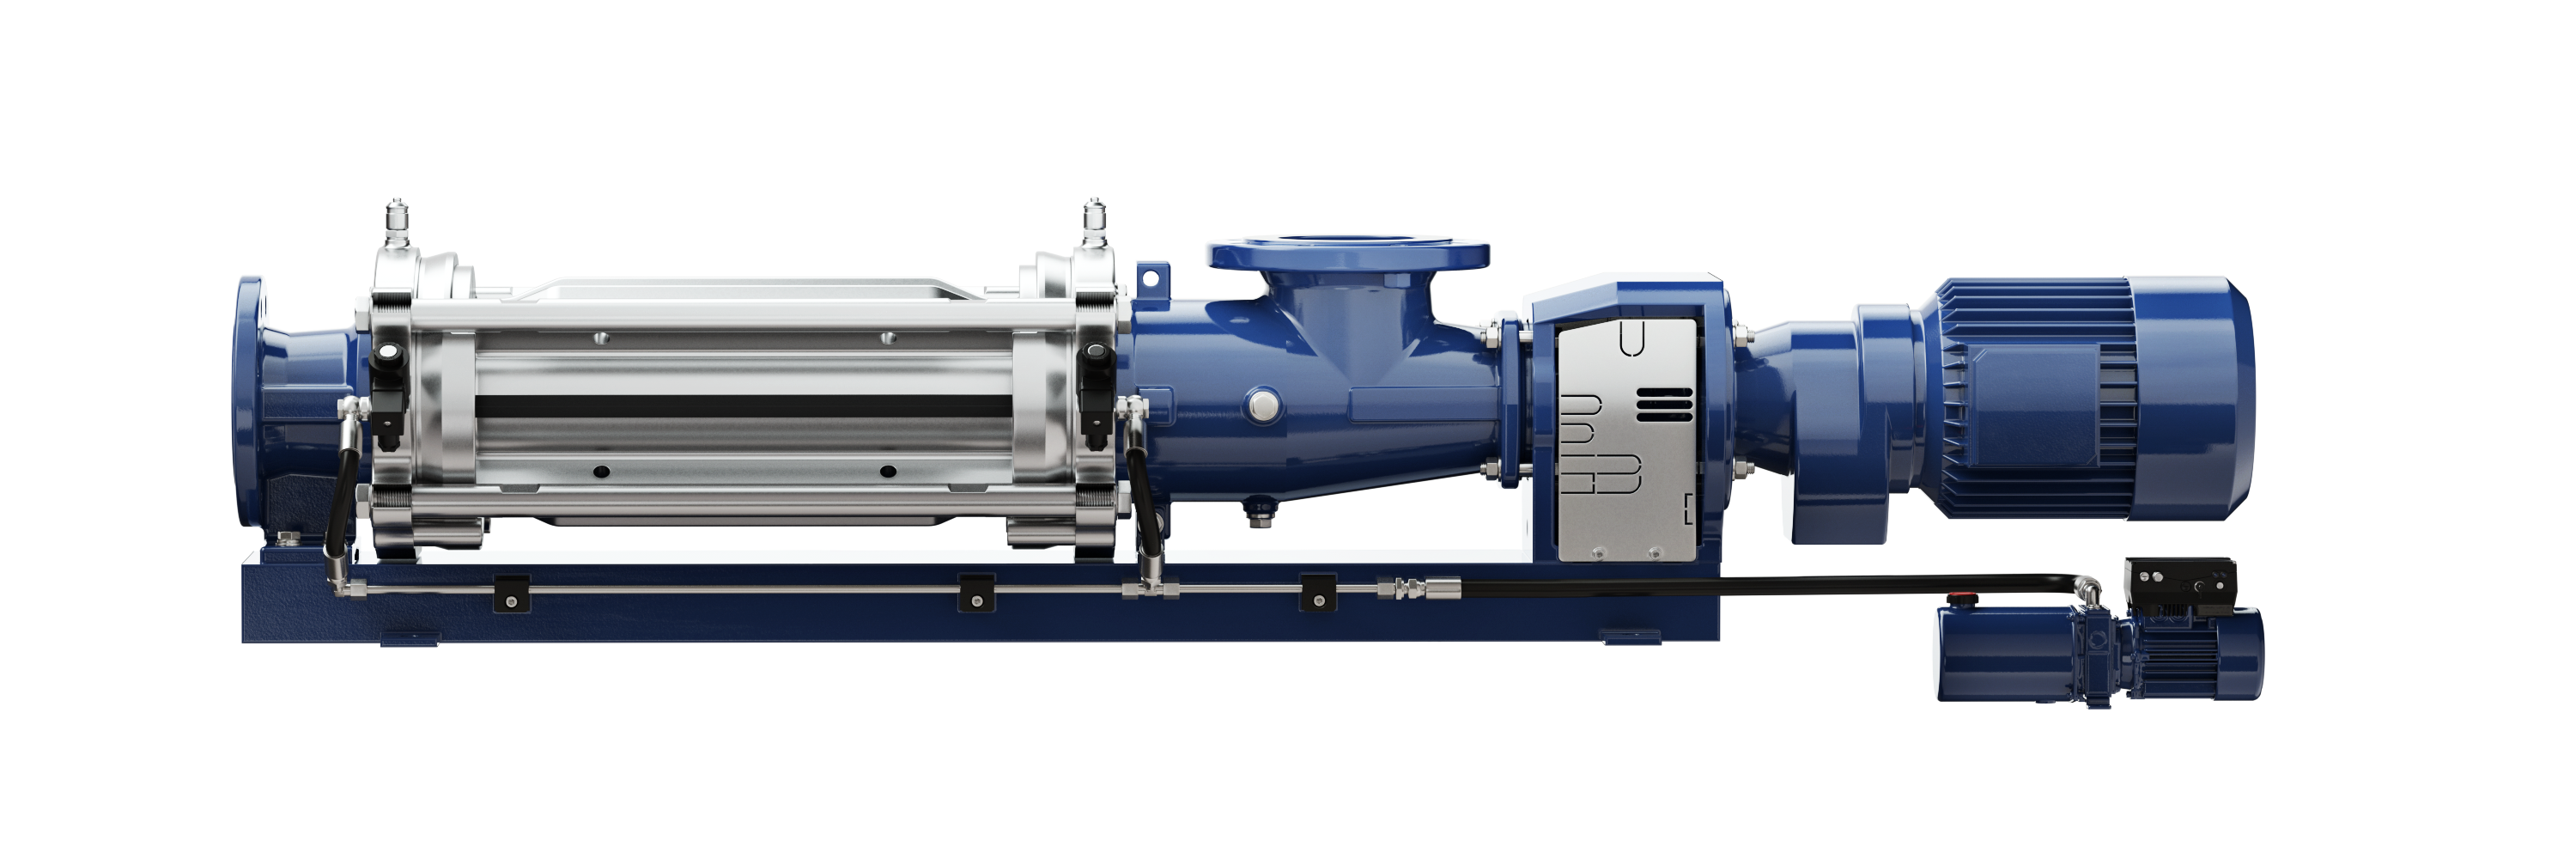 SEEPEX to showcase digital ecosystem for optimised pump operation and smart maintenance technologies for progressive cavity pumps